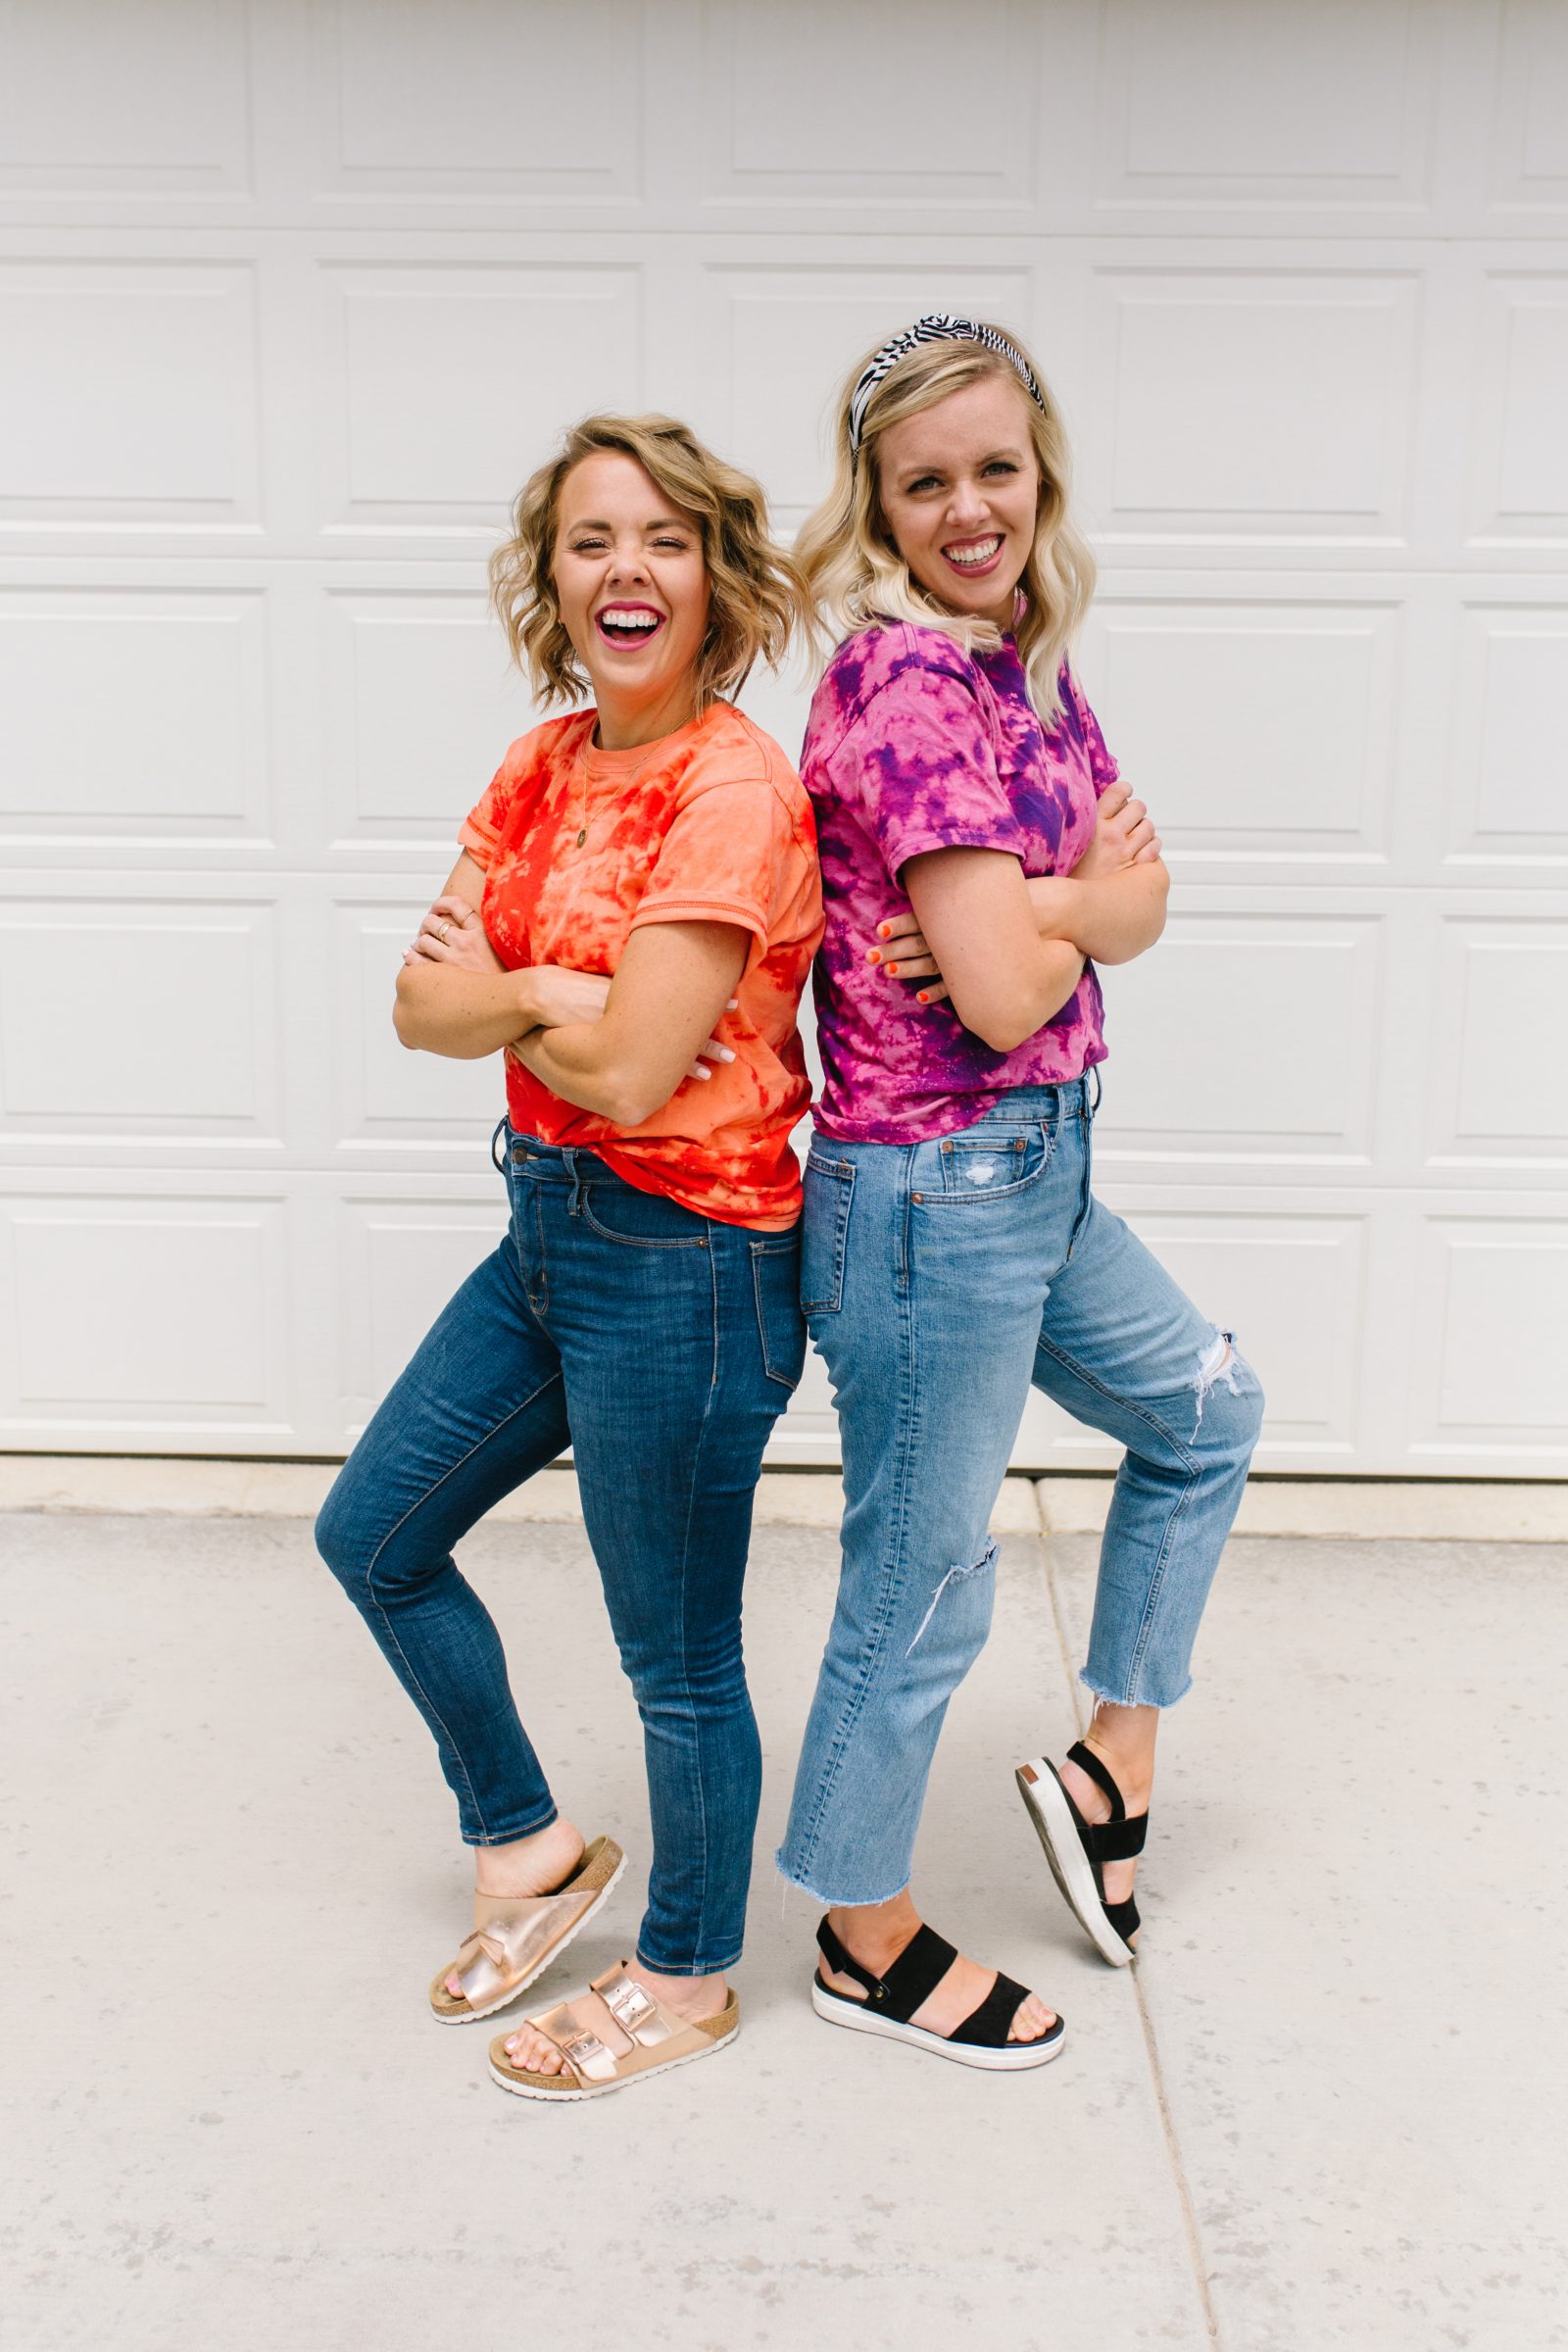 Summer Crafts: Bright Reverse Tie Dye Shirts + a tutorial featured by Top US Craft Blog + The Pretty Life Girls